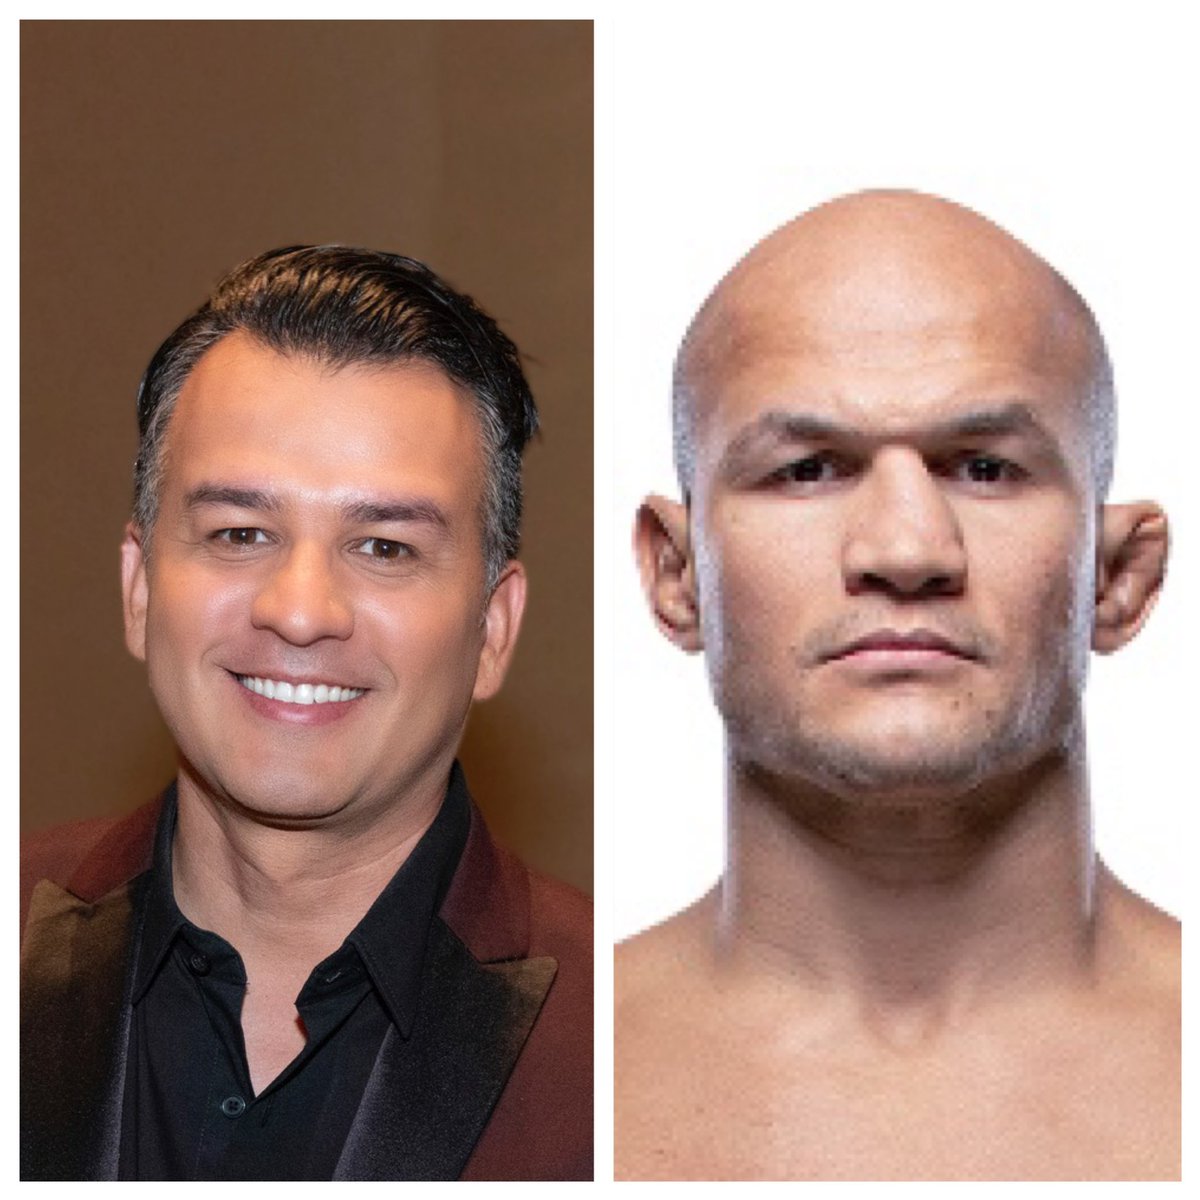 I was told I look like #JuniorDosSantos. 

Im sorry if I’ve offended you Mr. Dos Santos, please don’t kick my ass.

#MMA #UFC #DOSSANTOS #notfamous